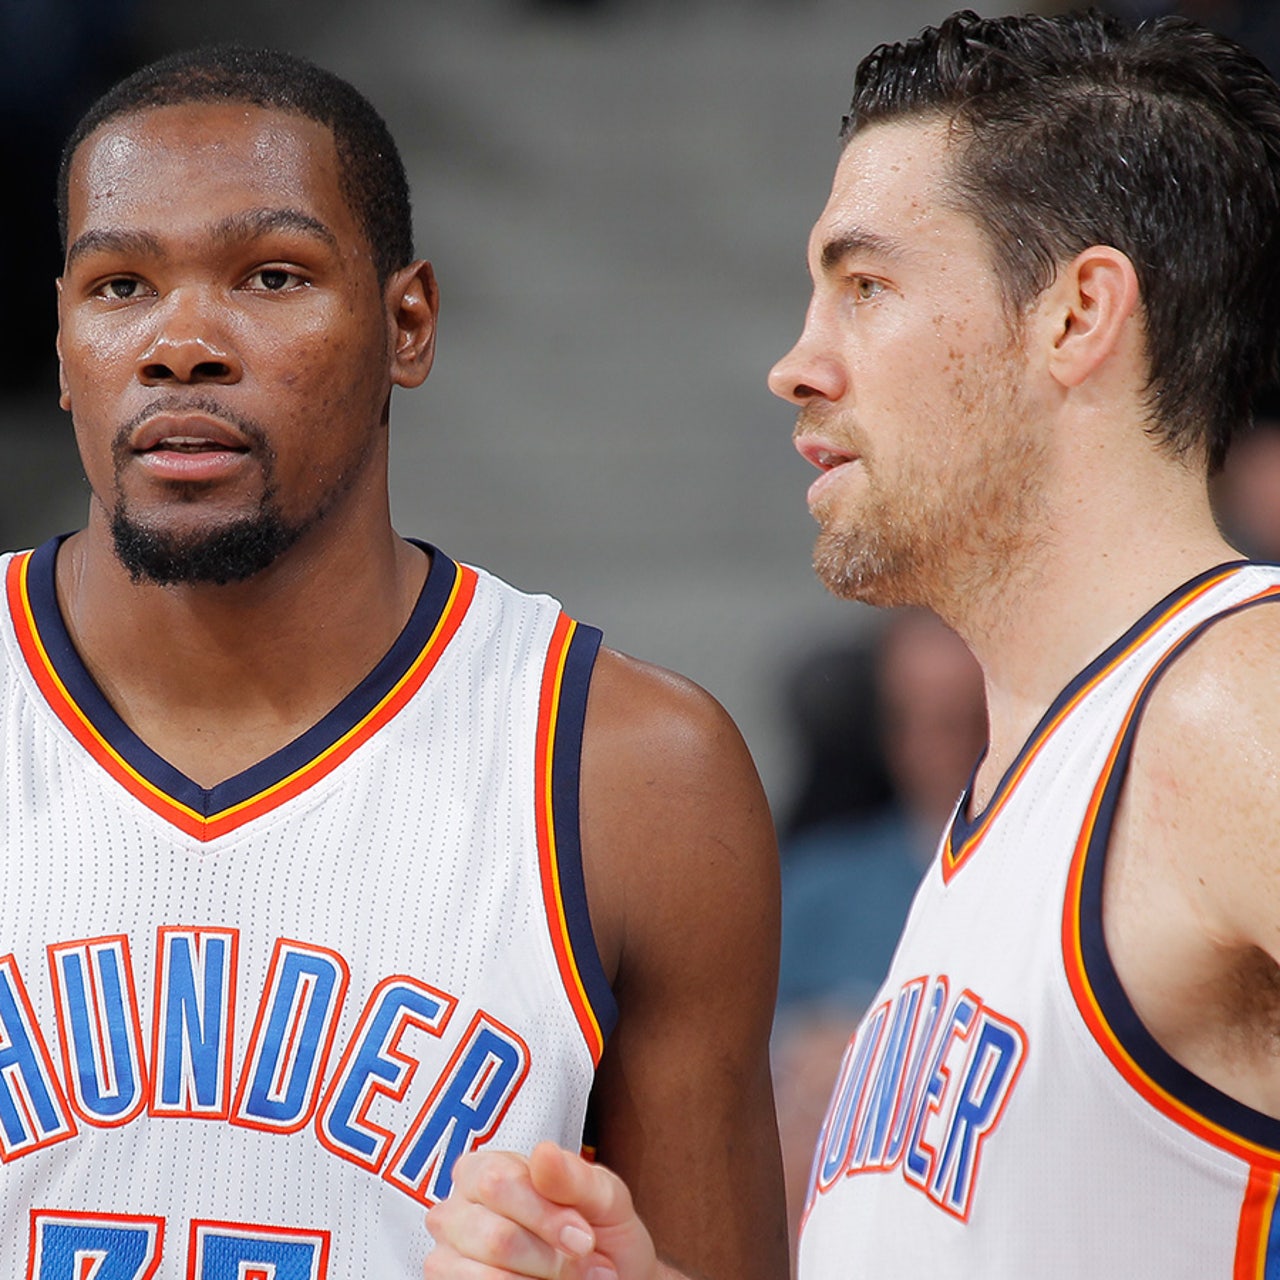 Kevin Durant returning to Oklahoma City for Nick Collison's jersey